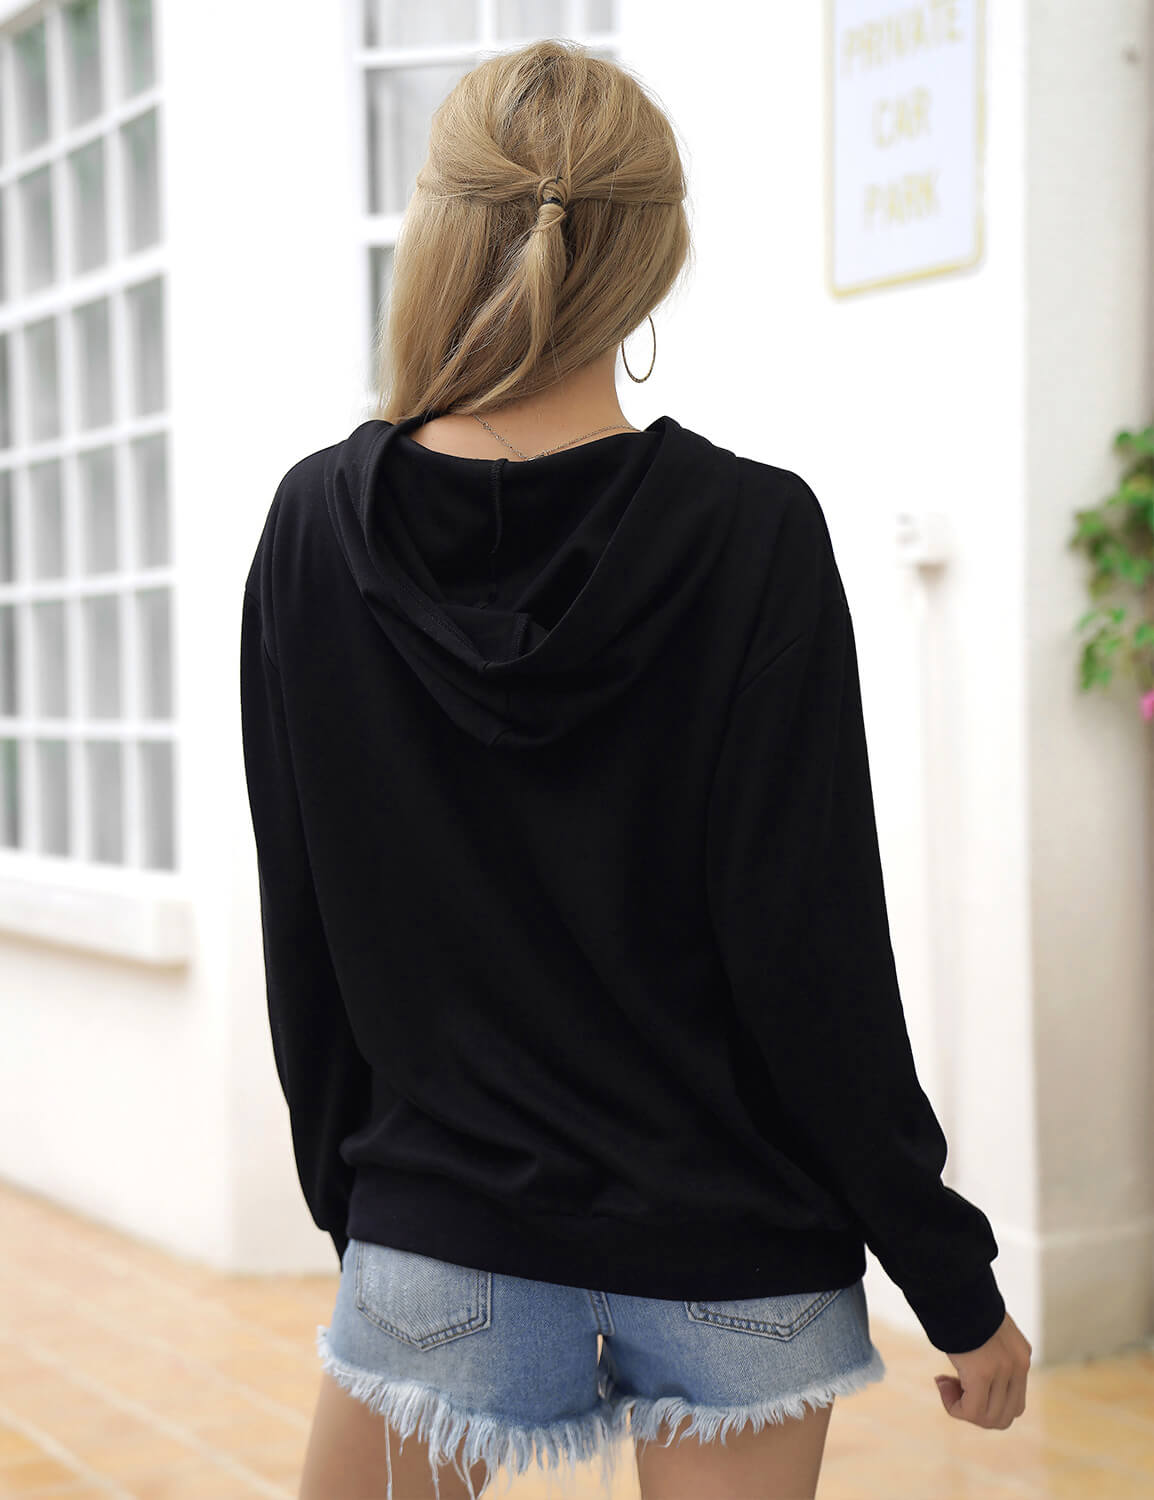 Blooming Jelly_Casual Heart Embroidery Hoodie_Black_305094_02_Fall Fashion Women's Outfits_Tops_Sweatshirt